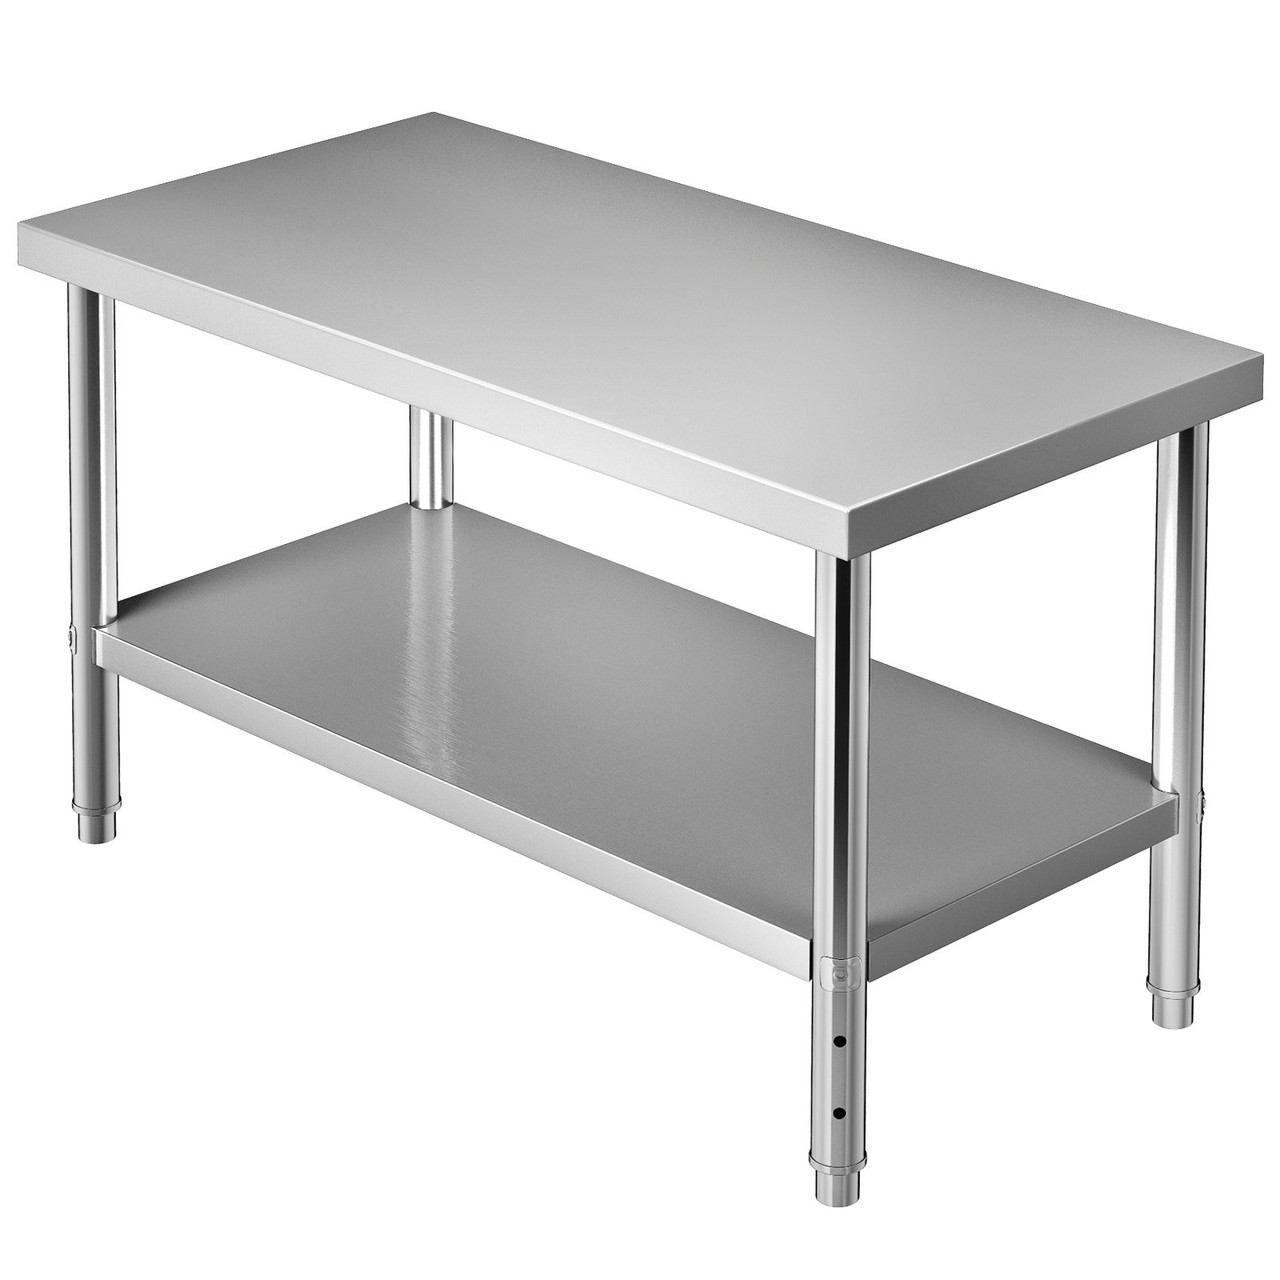 Stainless Steel Prep Table, 48 x 24 x 34 Inch, 550lbs Load Capacity Heavy Duty Metal Worktable with Adjustable Undershelf, Commercial Workstation for